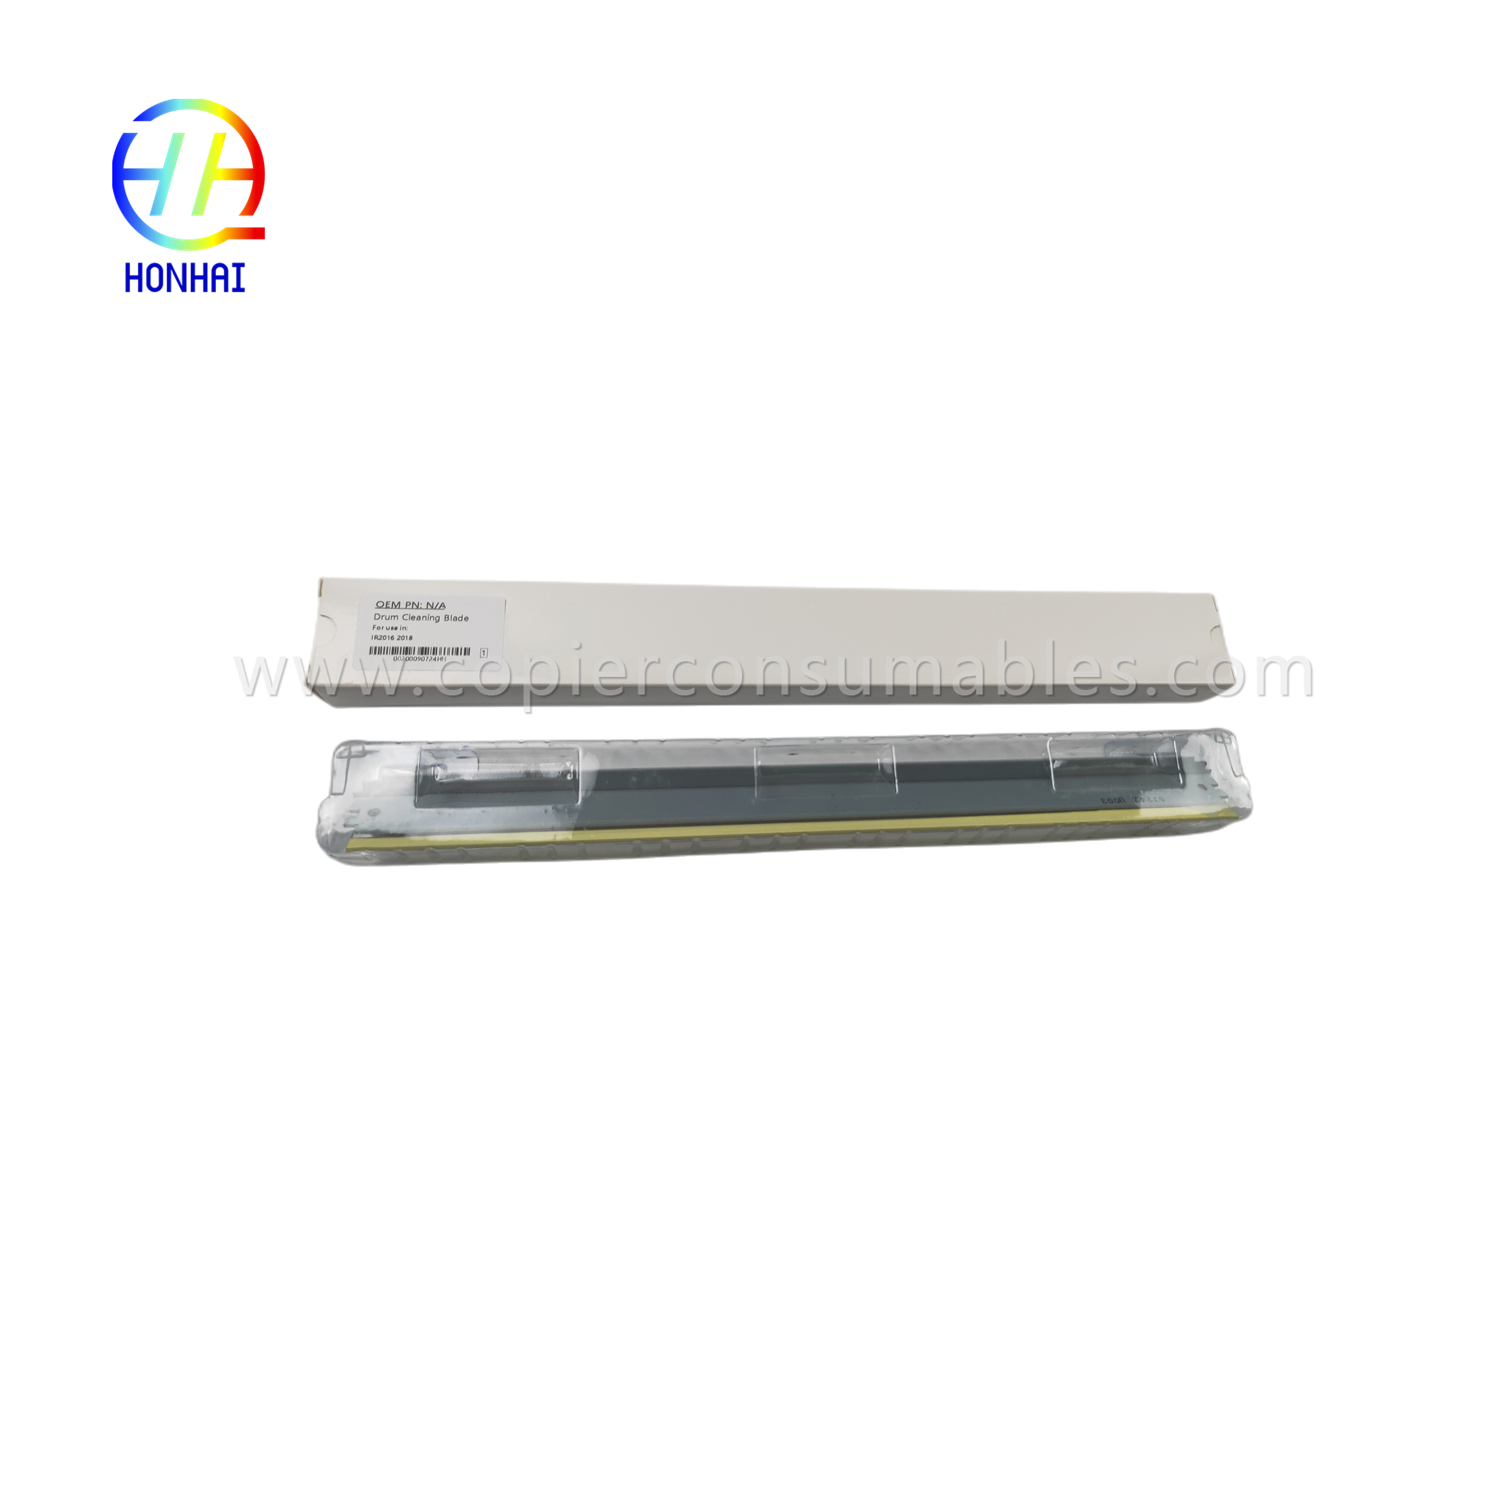 https://c585.goodao.net/drum-cleaning-blade-for-canon-ir1600-1610-2000-2016-2020-2320-product/